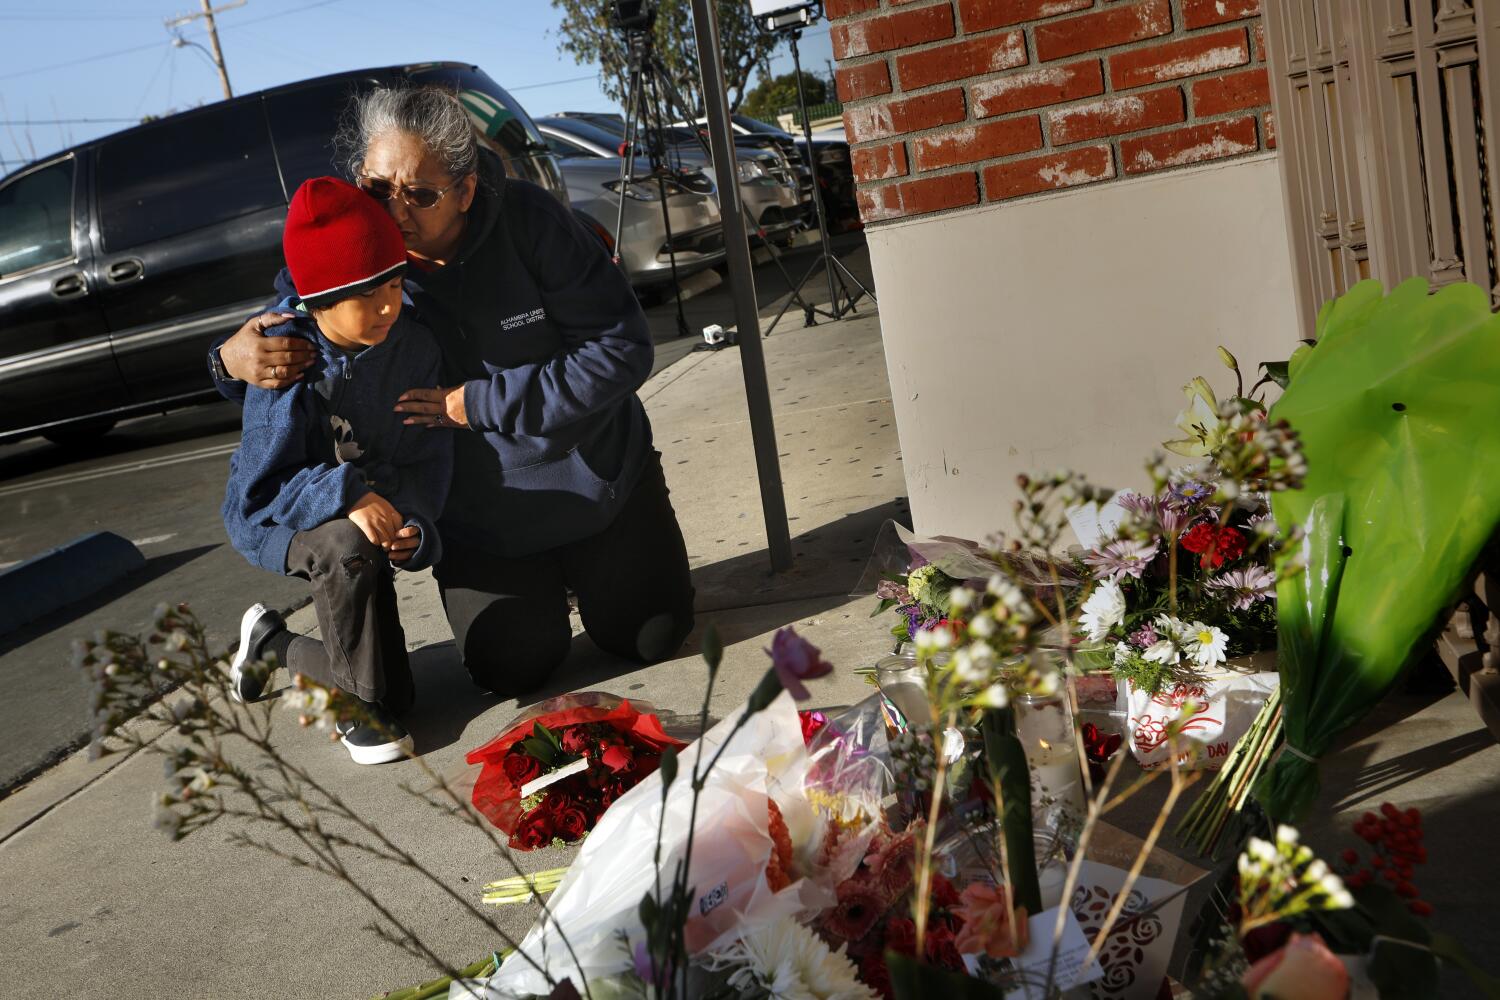 Three gun control bills inspired by Monterey Park massacre are closer to becoming law